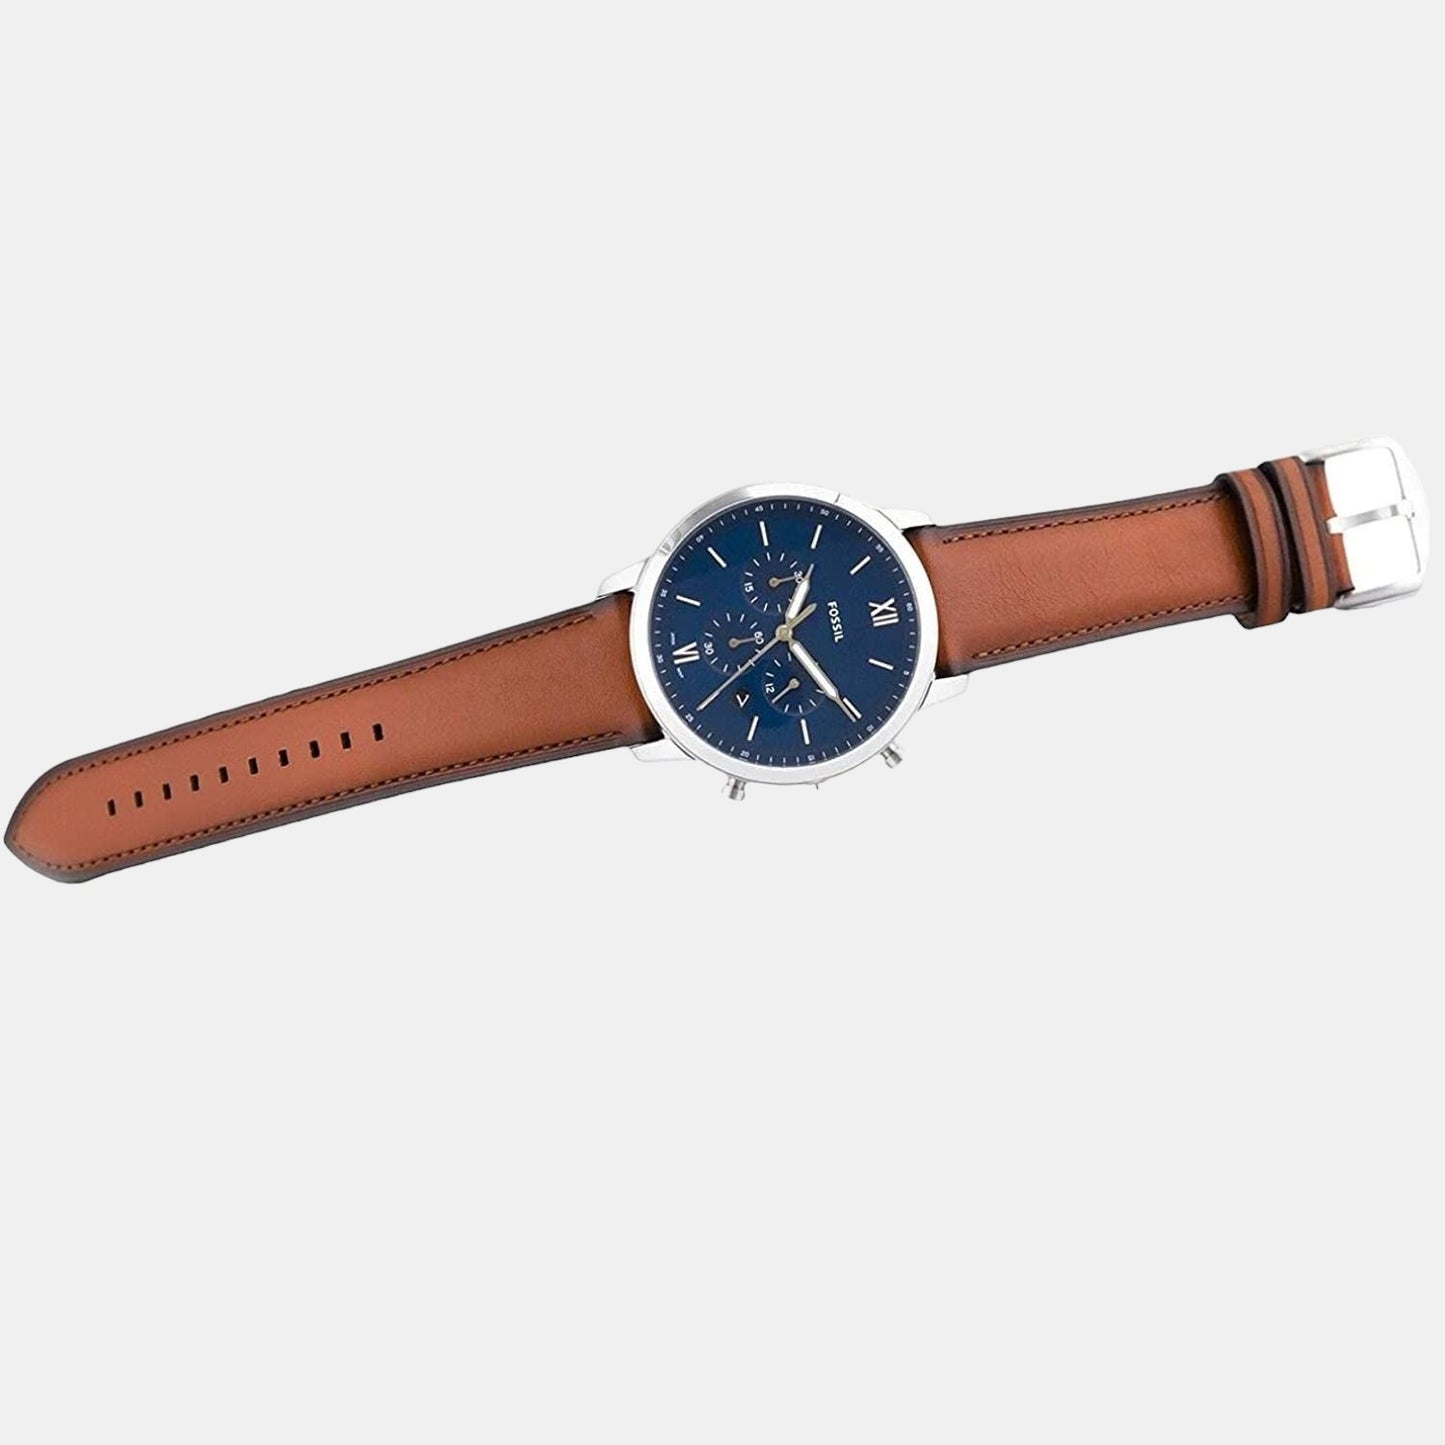 Male Blue Leather Chronograph Watch FS5453